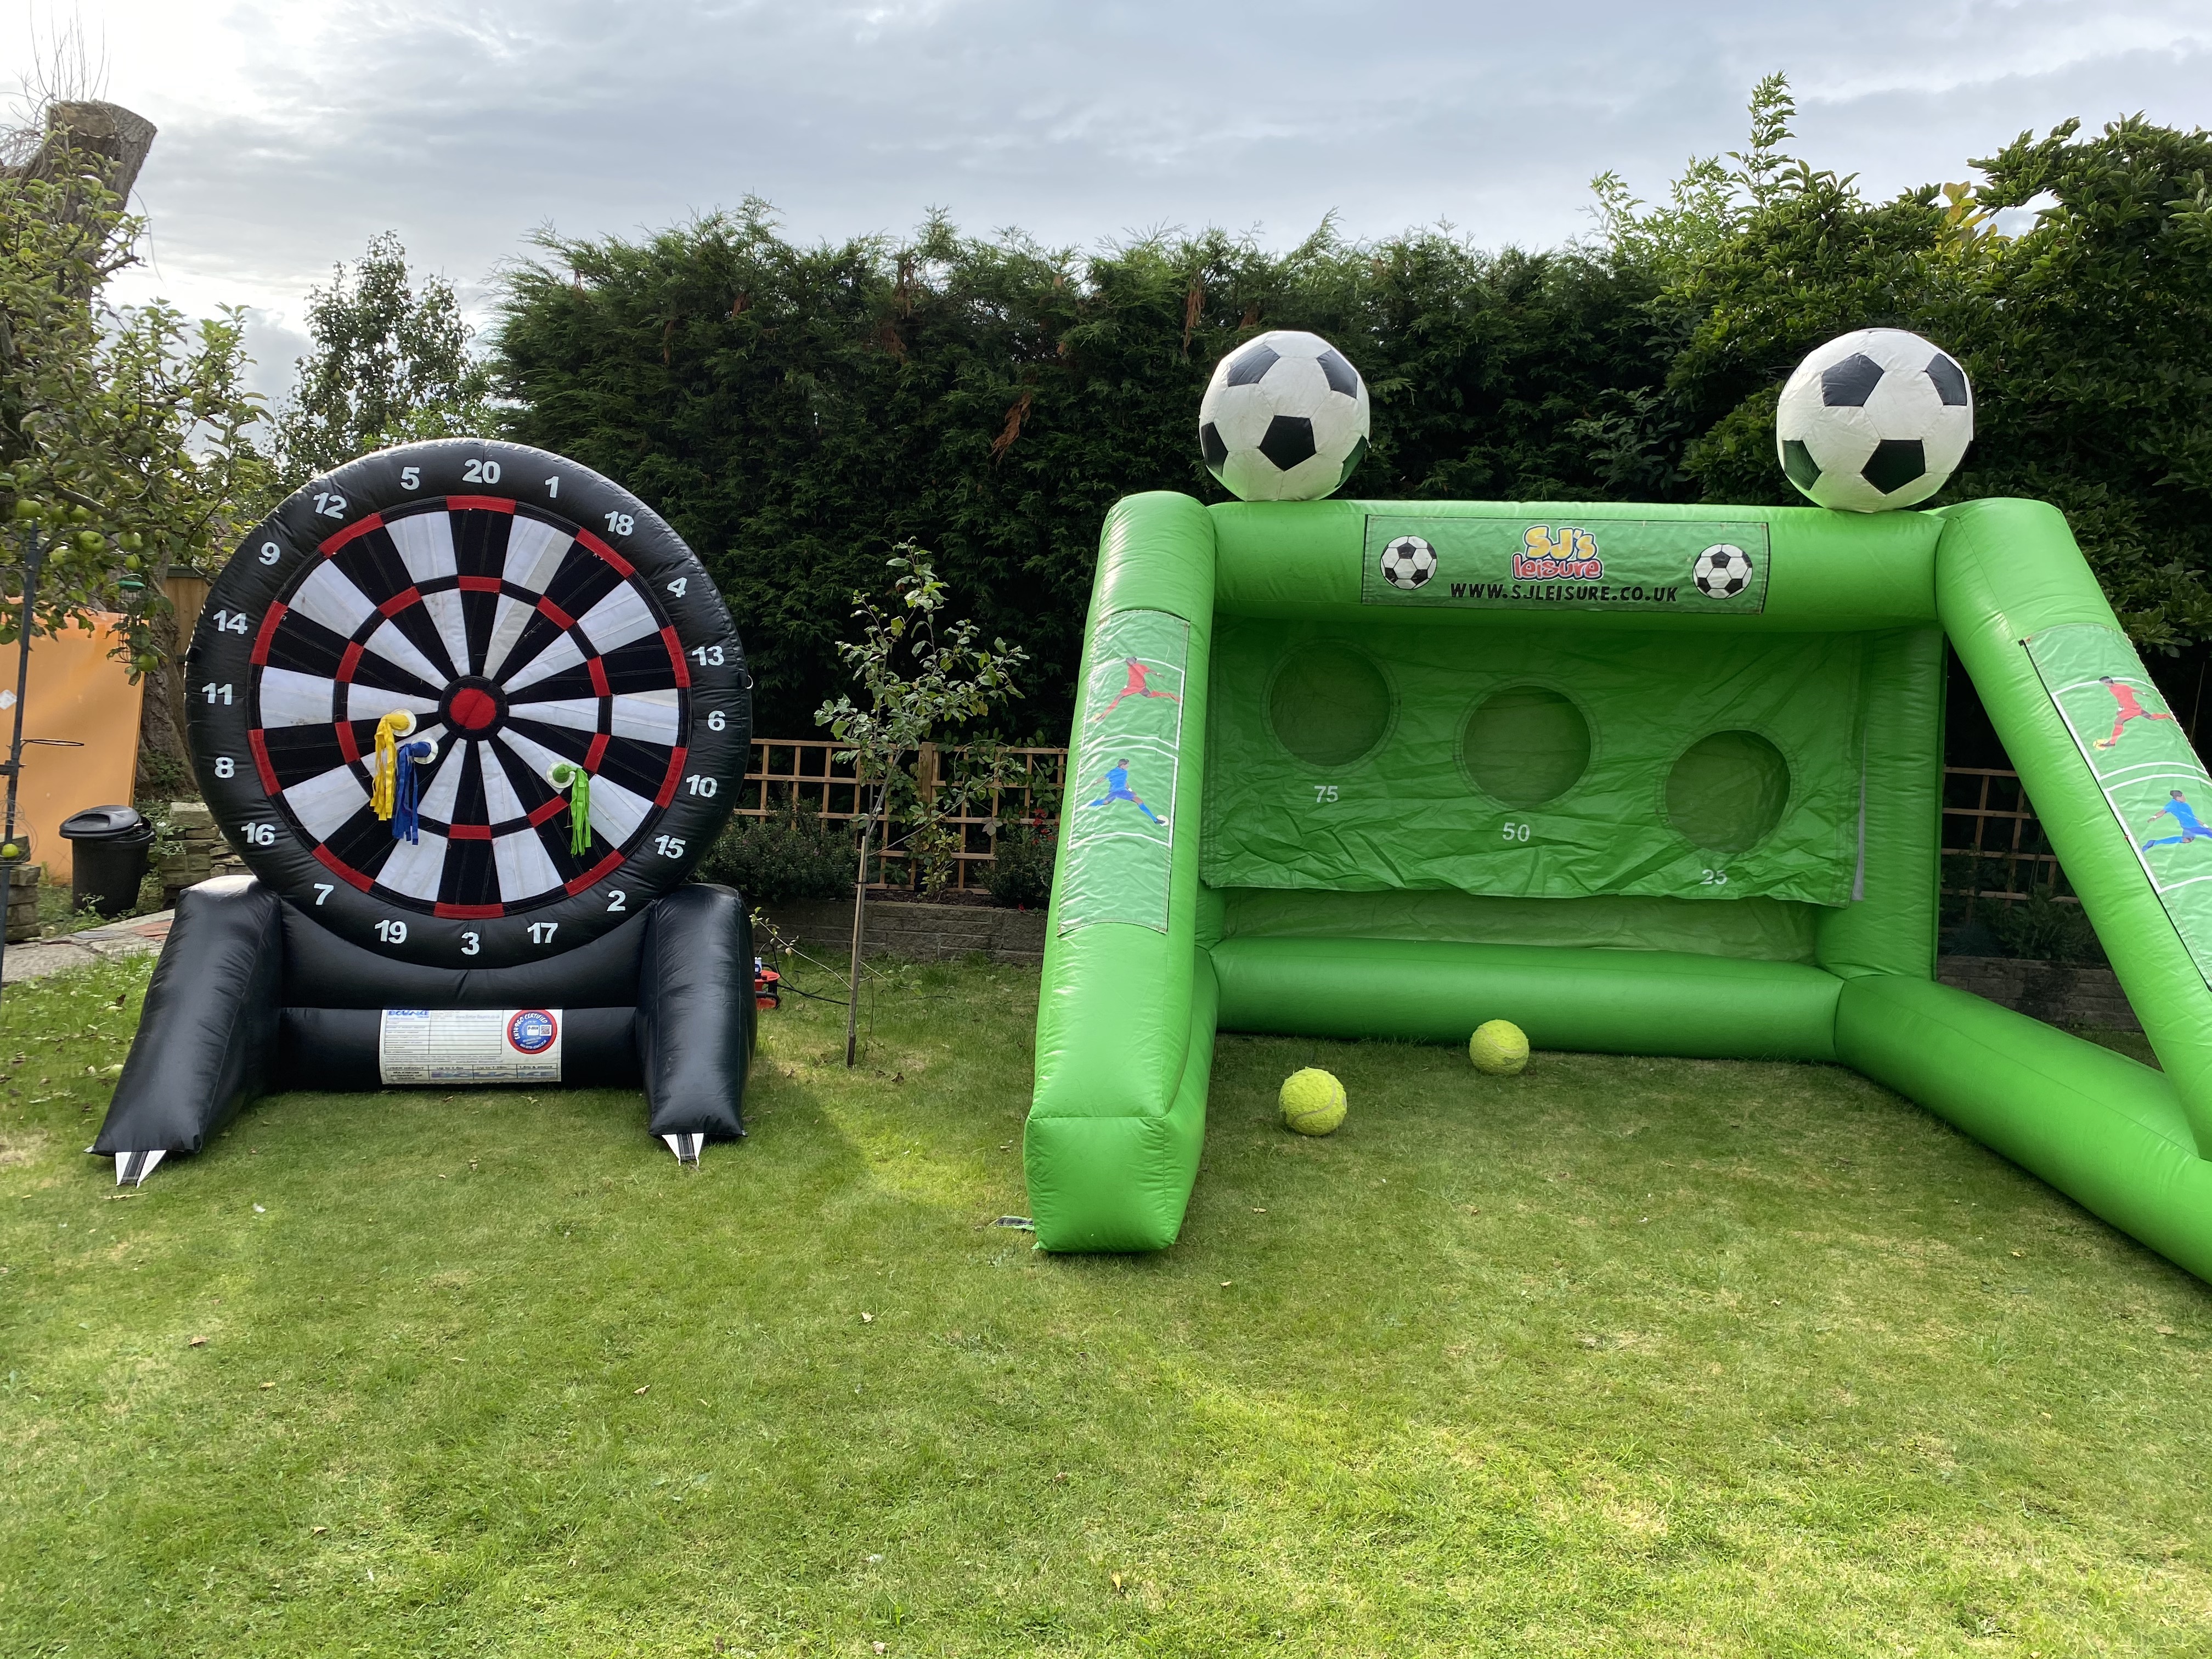 This image shows some of SJ's Leisure's fantastic inflatable and fun products available to hire